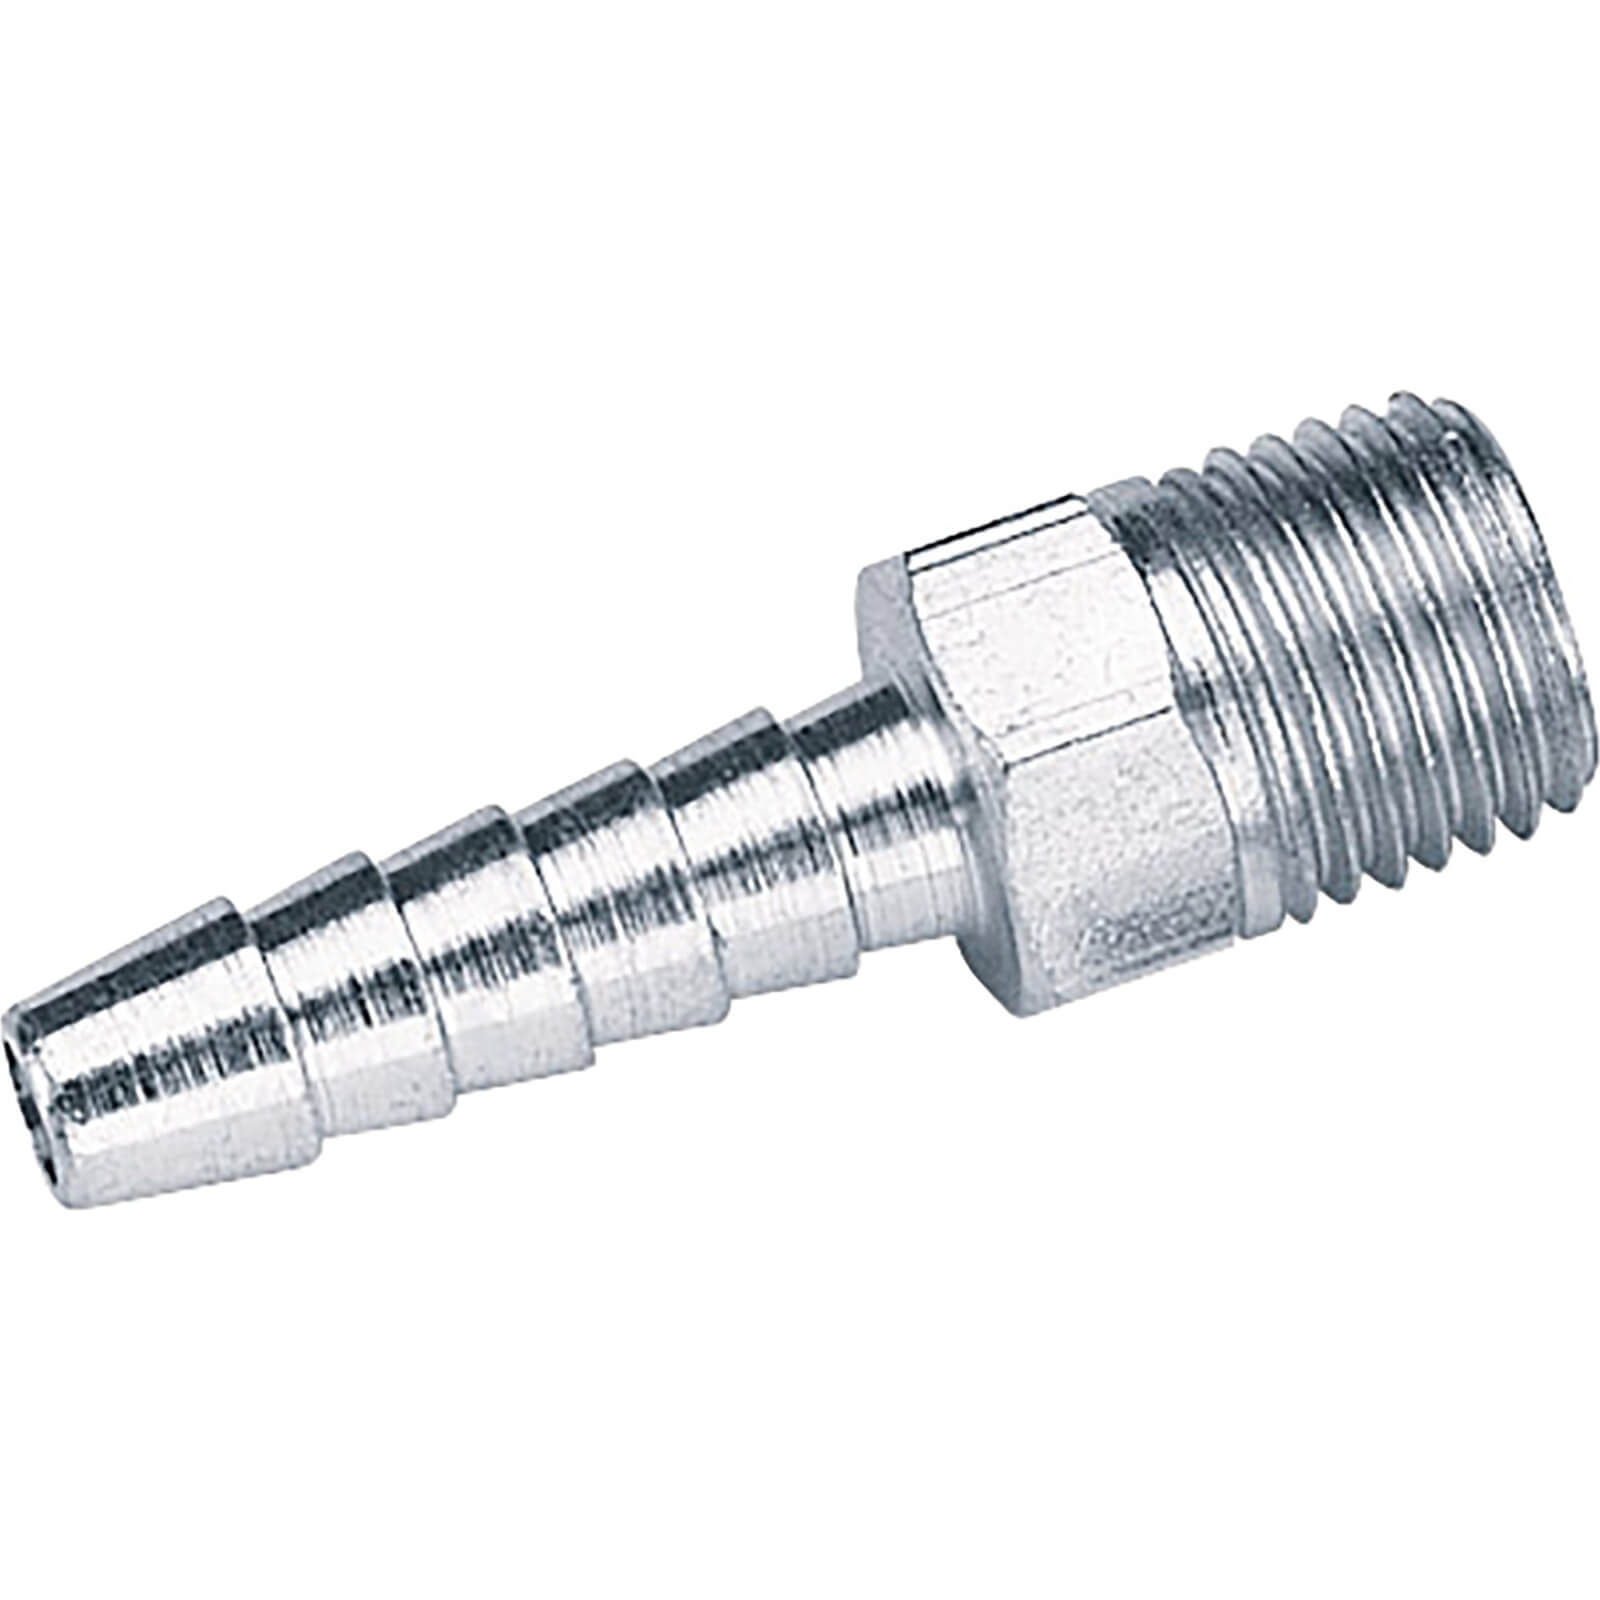 Image of Draper PCL Tailpiece Air Line Fitting BSPT Male Thread 1/4" BSP 1/4" Pack of 5